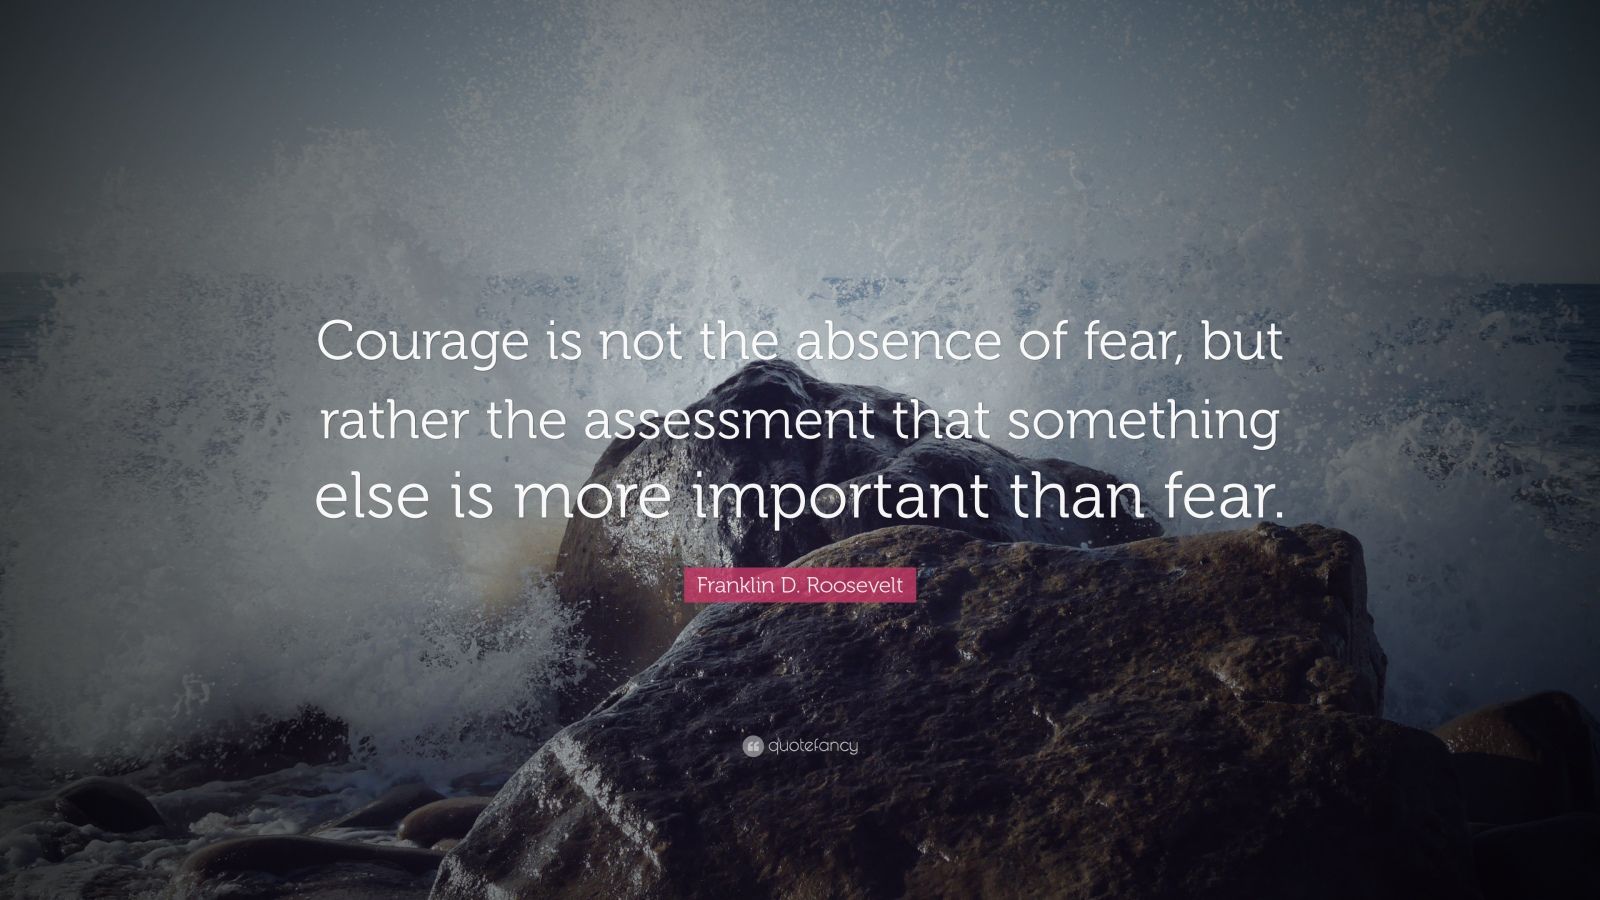 Franklin D. Roosevelt Quote: “Courage is not the absence of fear, but